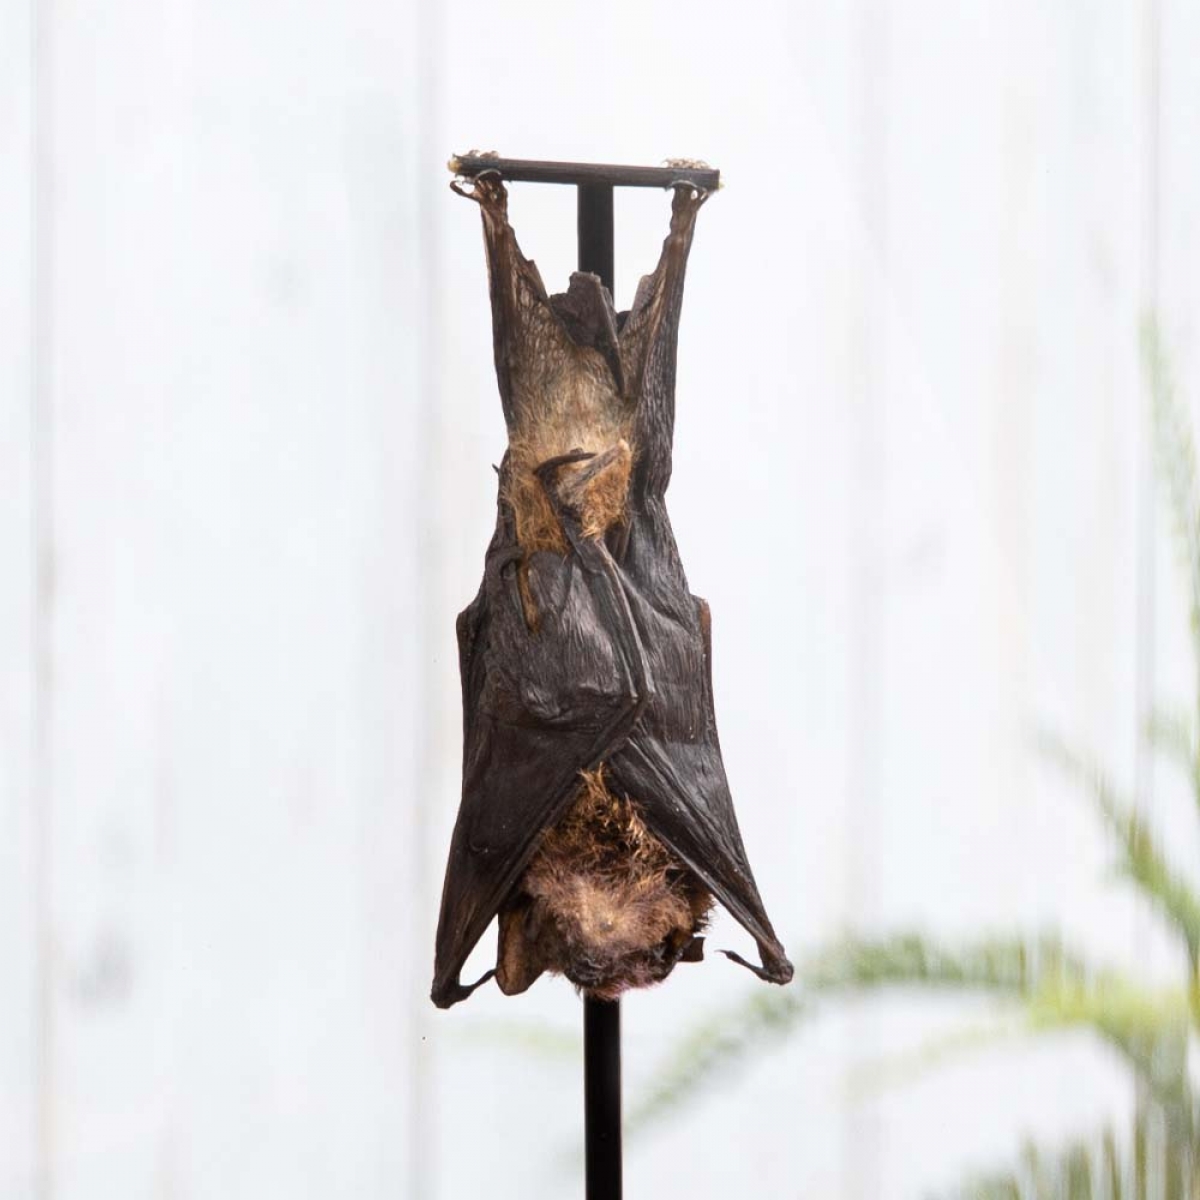 Long-fingered Bat in Glass Dome with Wooden Base (Minipterus medius)